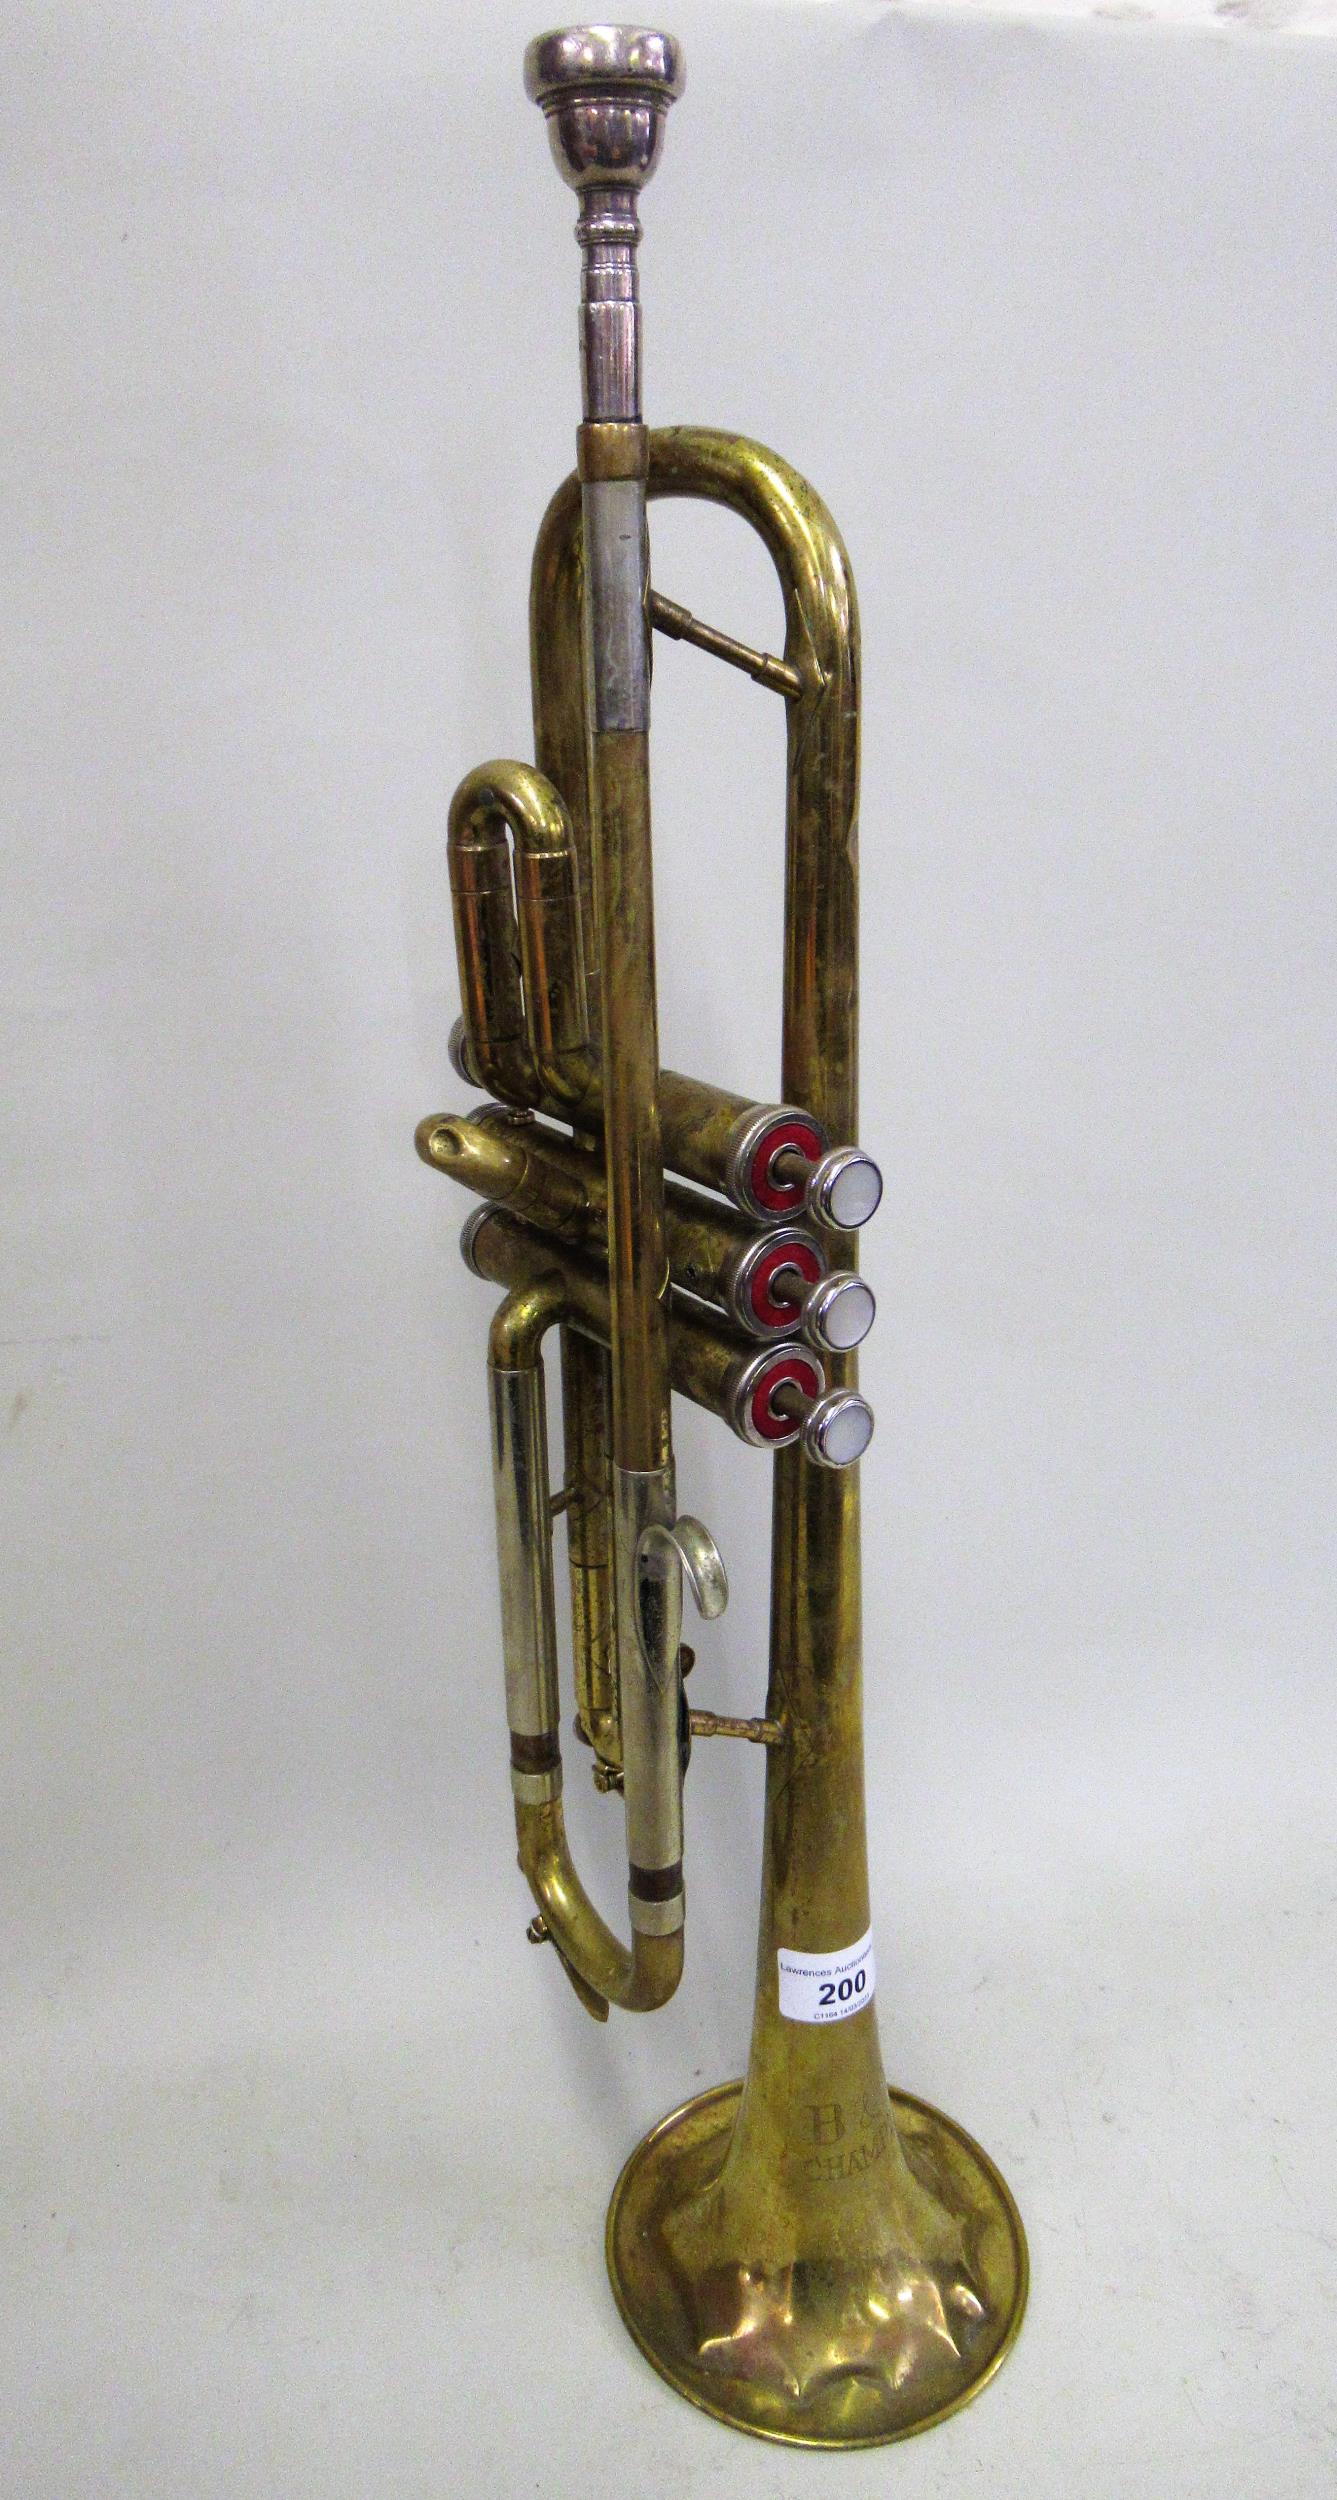 20th Century brass trumpet with mouthpiece, engraved B&M Champion